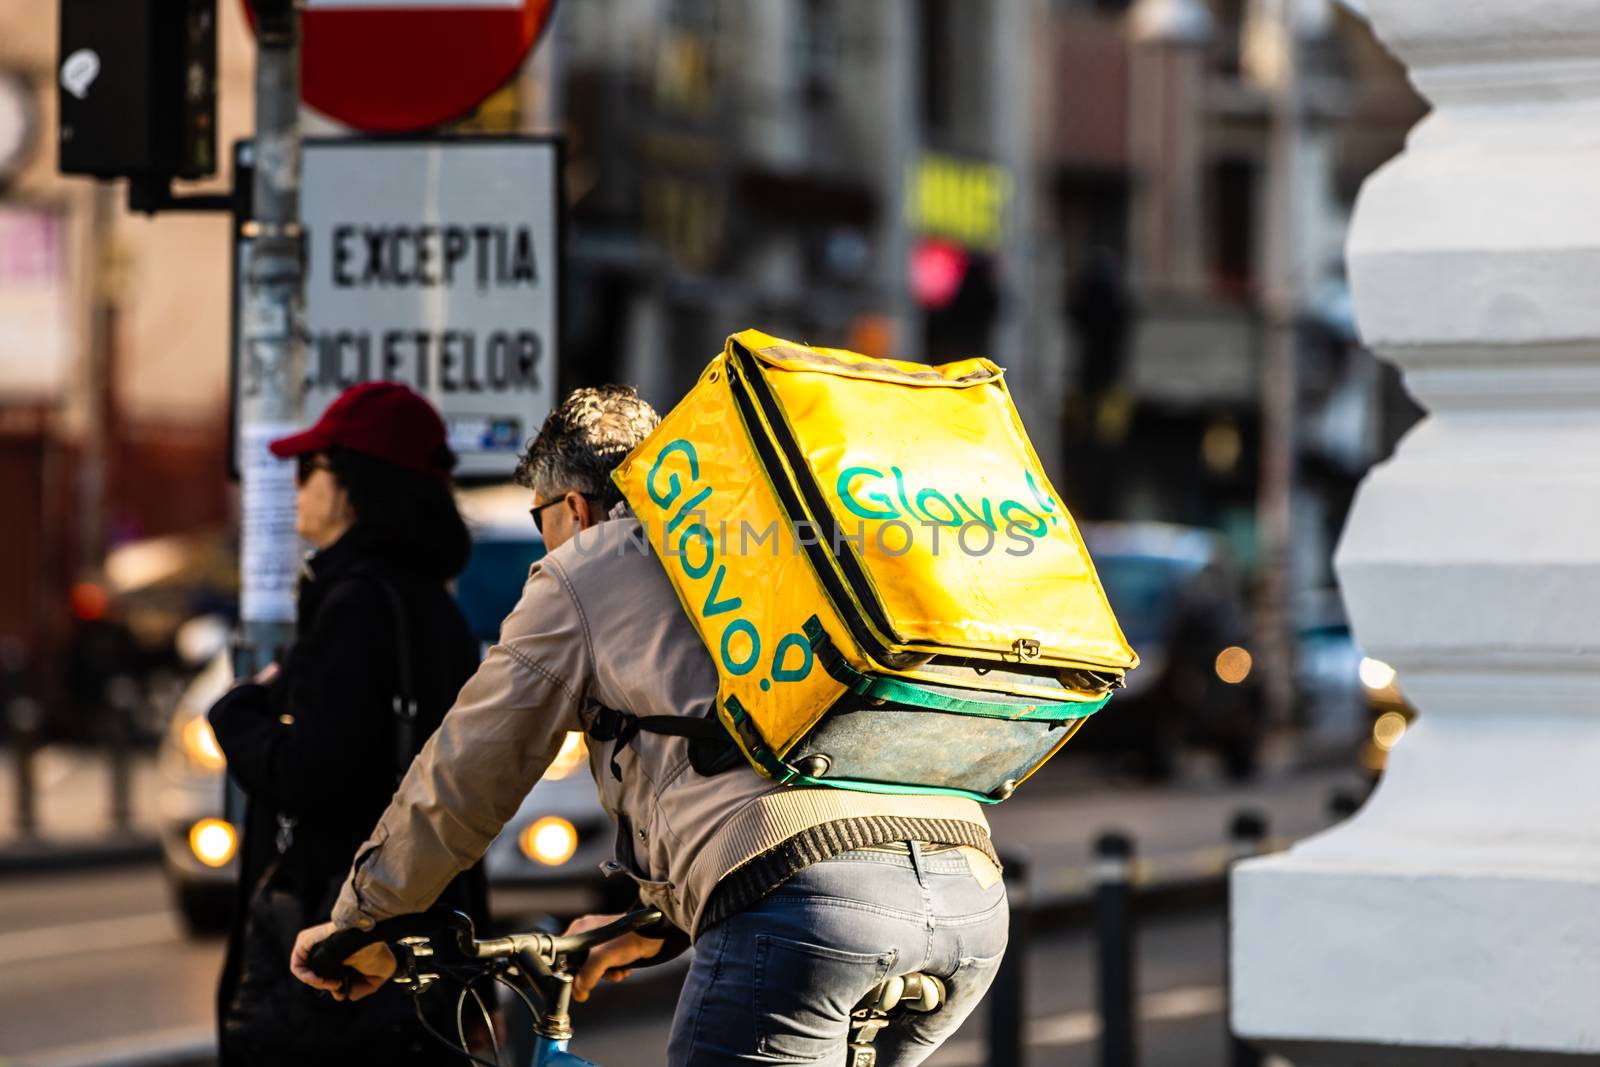 A Glovo food delivery courier on a bike. Restaurants are closed  by vladispas